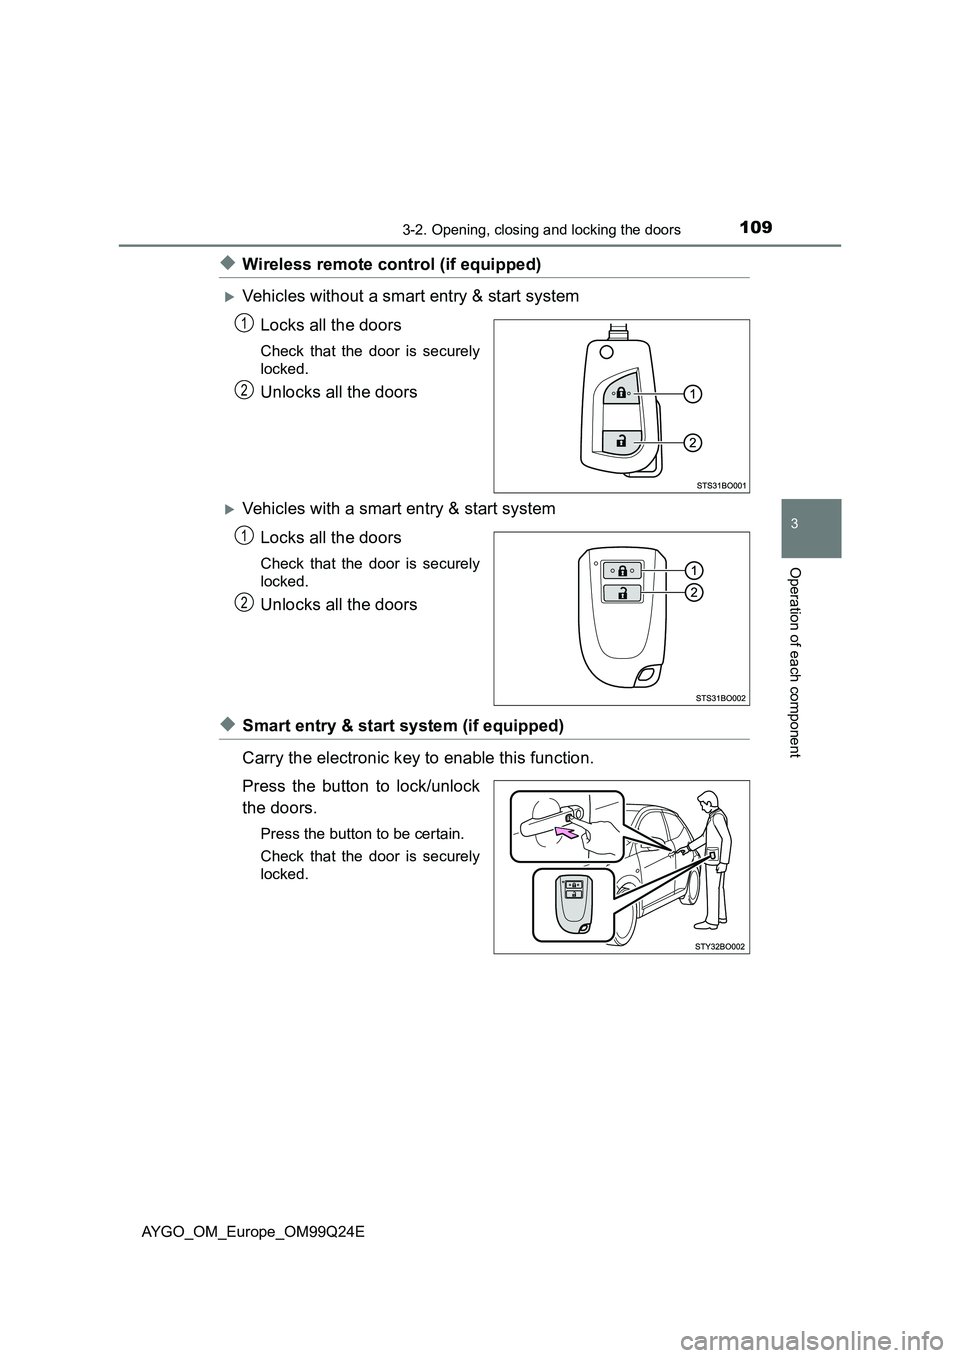 TOYOTA AYGO 2017  Owners Manual (in English) 1093-2. Opening, closing and locking the doors
3
Operation of each component
AYGO_OM_Europe_OM99Q24E
◆Wireless remote control (if equipped)
Vehicles without a smart entry & start system 
Locks al